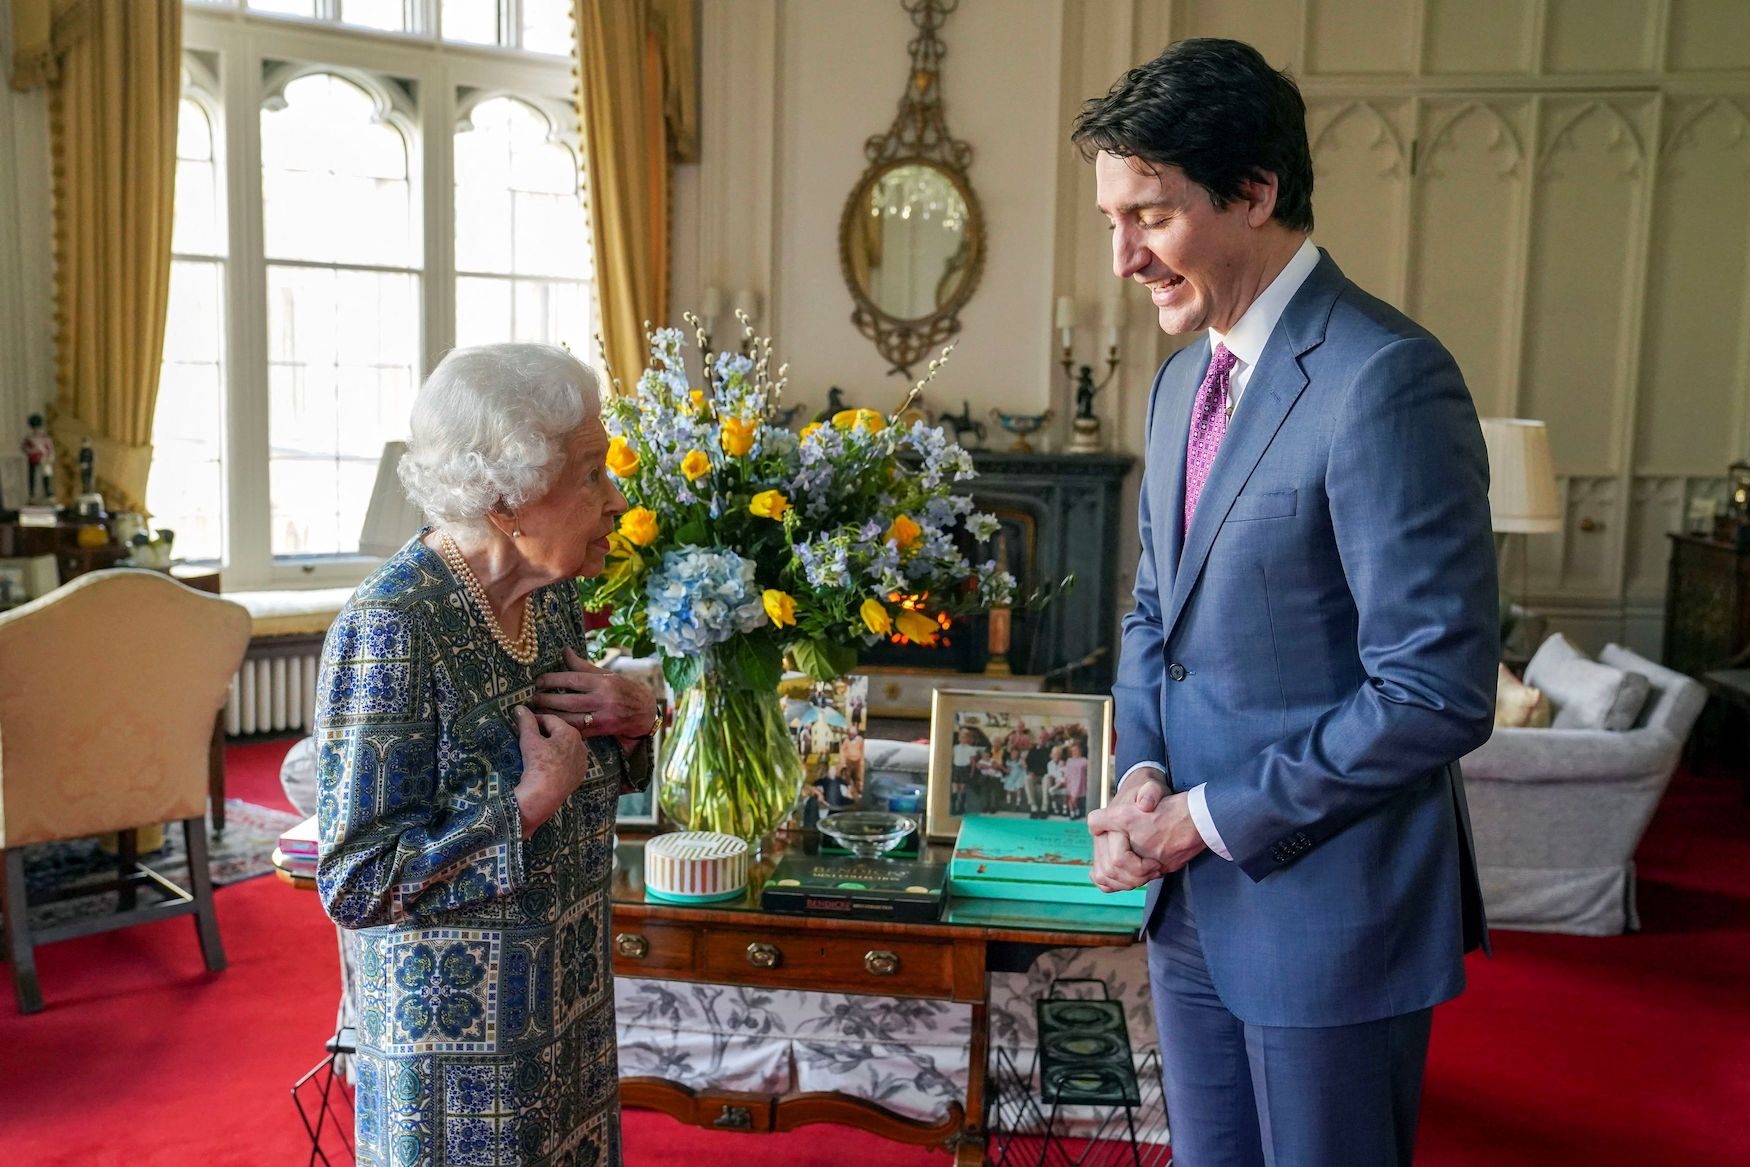 Queen meets Canadian prime minister in first in-person meeting since catching COVID-19